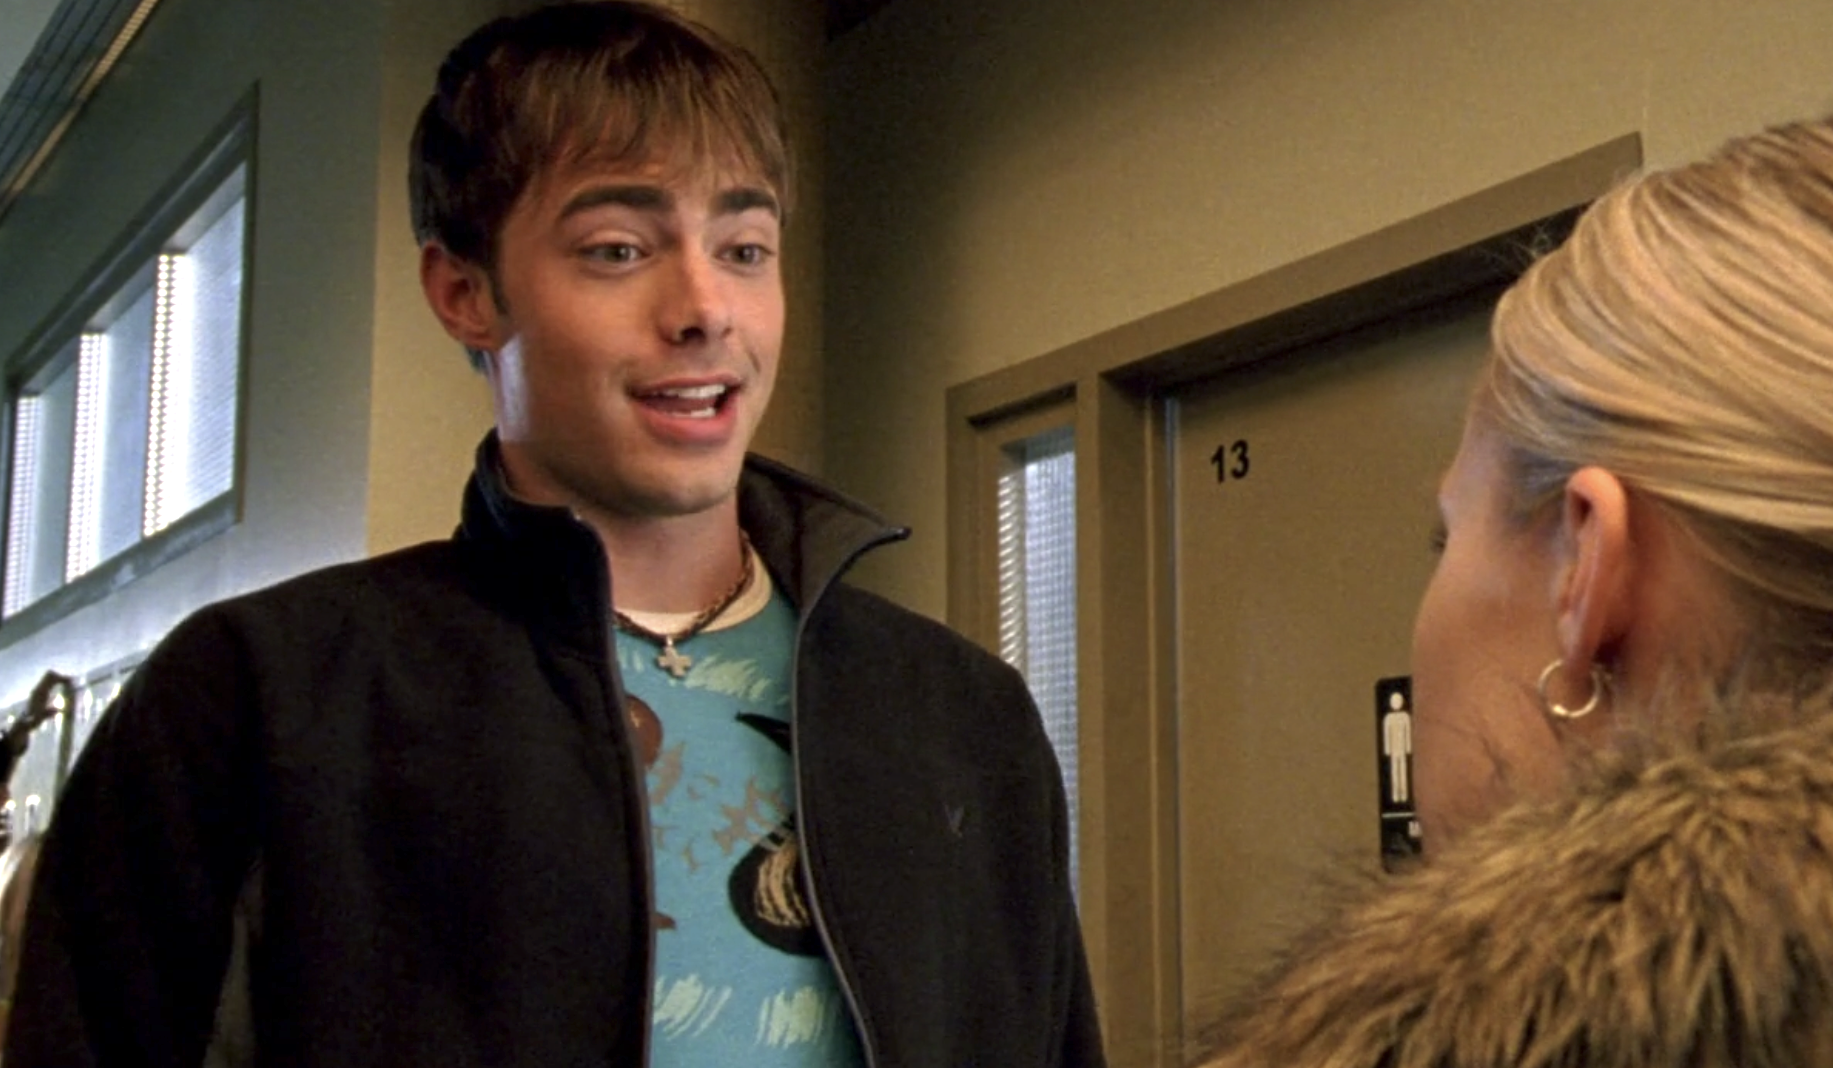 Screenshot from S1E9 of Veronica Mars. Casey Gant is looking at Veronica. They are standing in the school hallway and Casey's eyebrows are raised and he's in the middle of talking with a smile on his face.